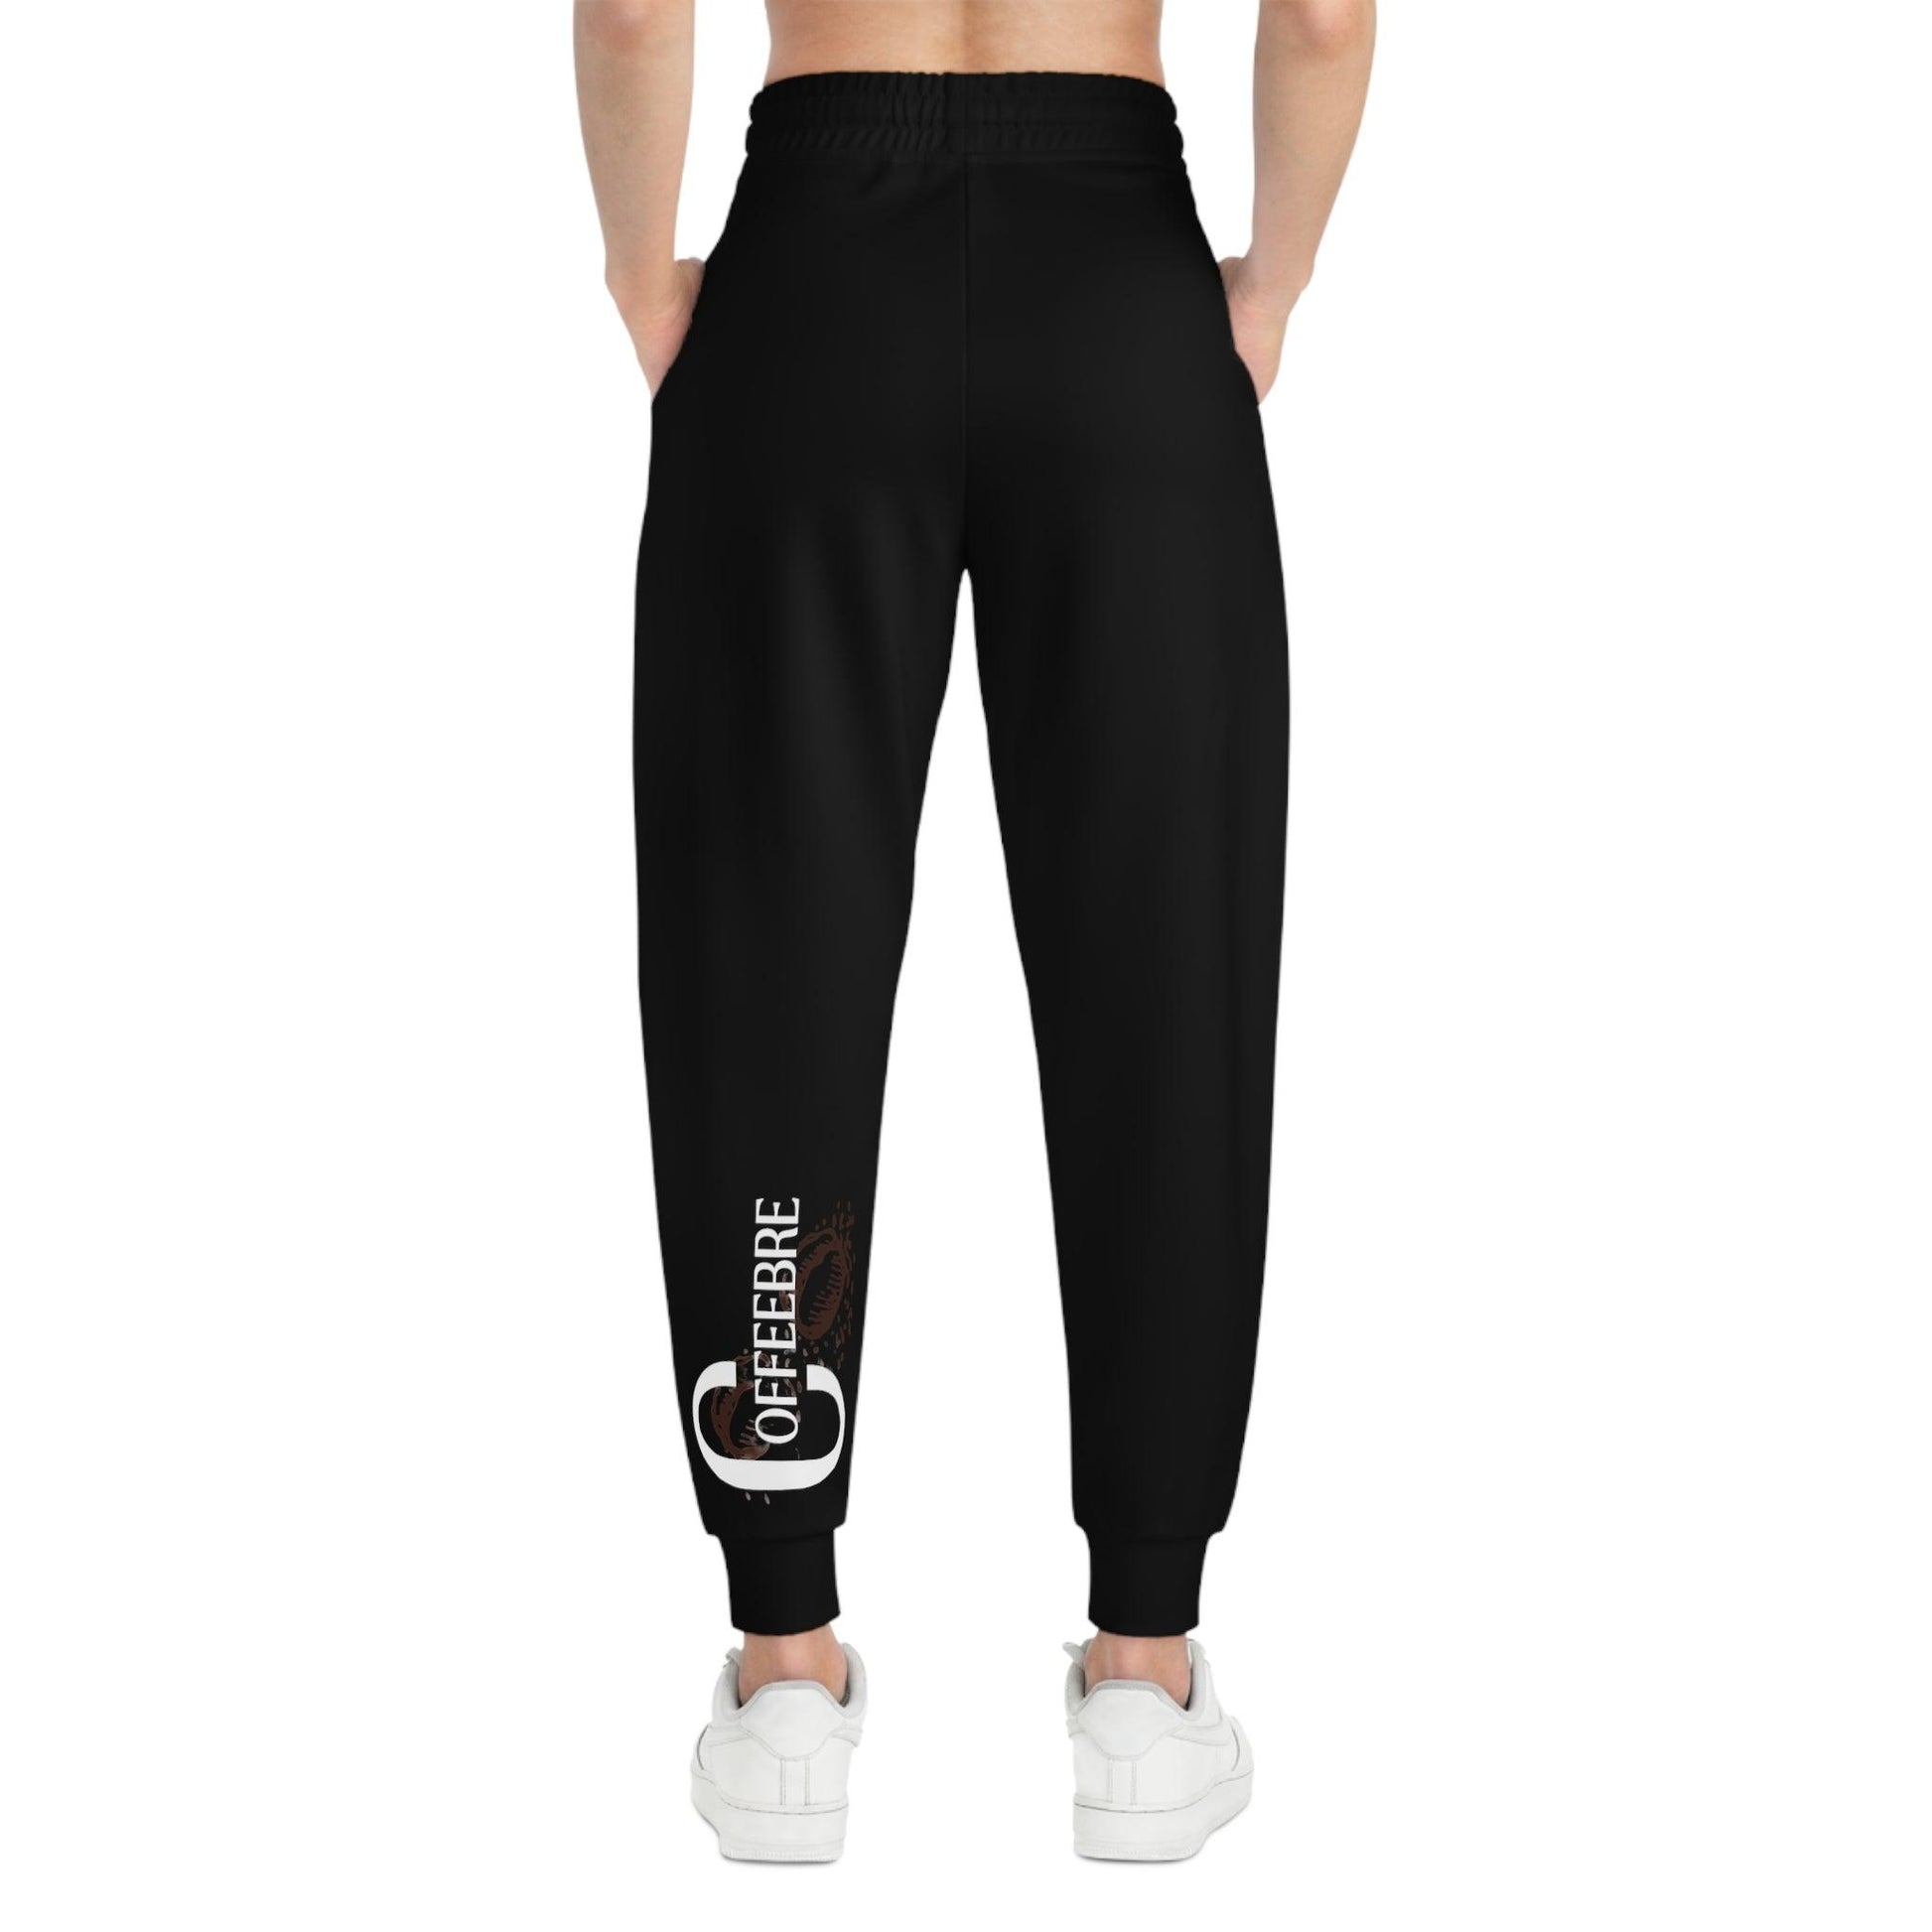 Athletic workout Joggers - COFFEEBRE